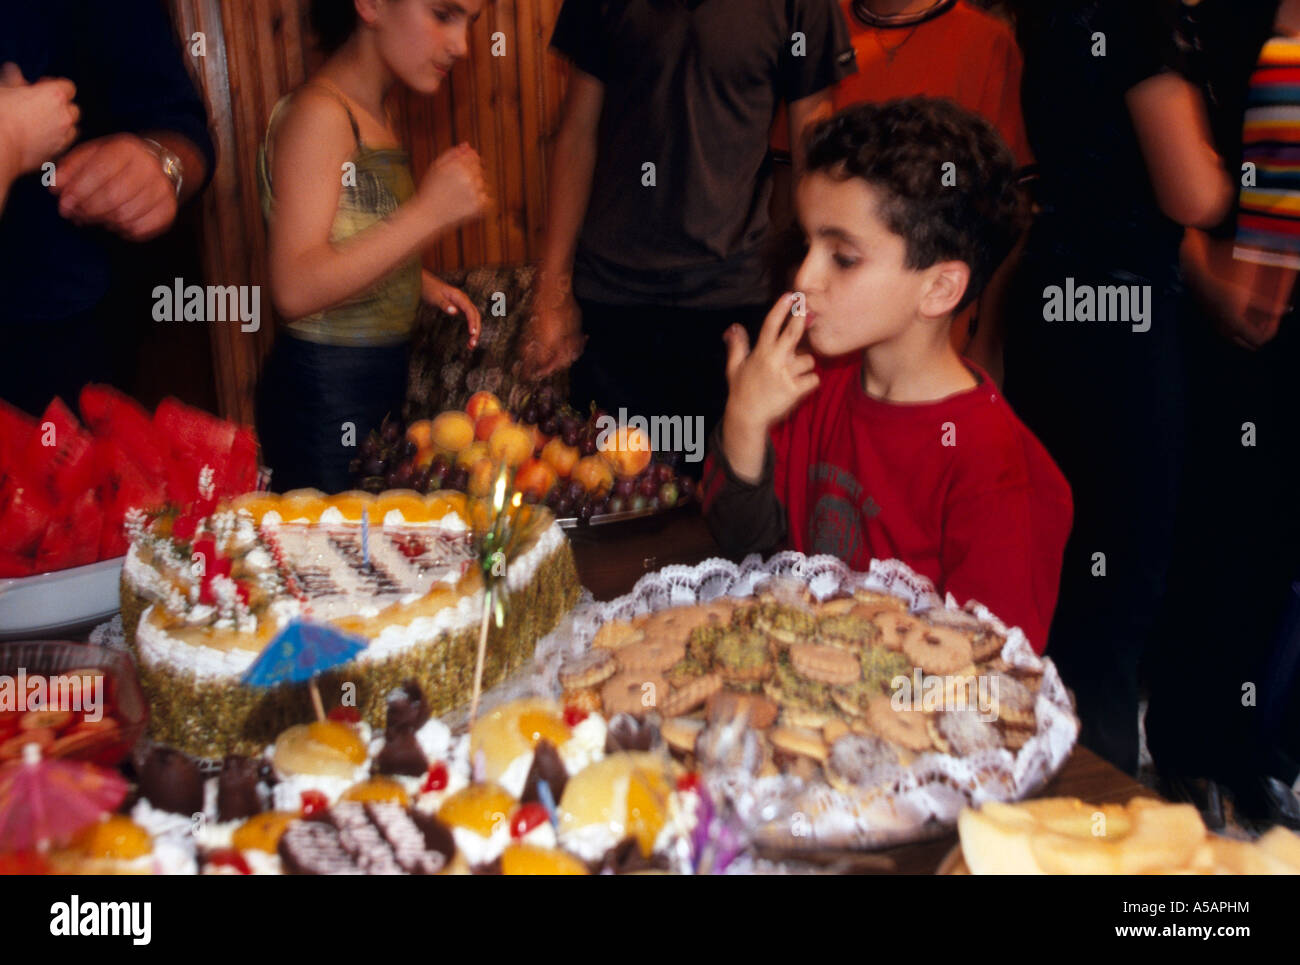 People at a birthday party in Beirut Stock Photo